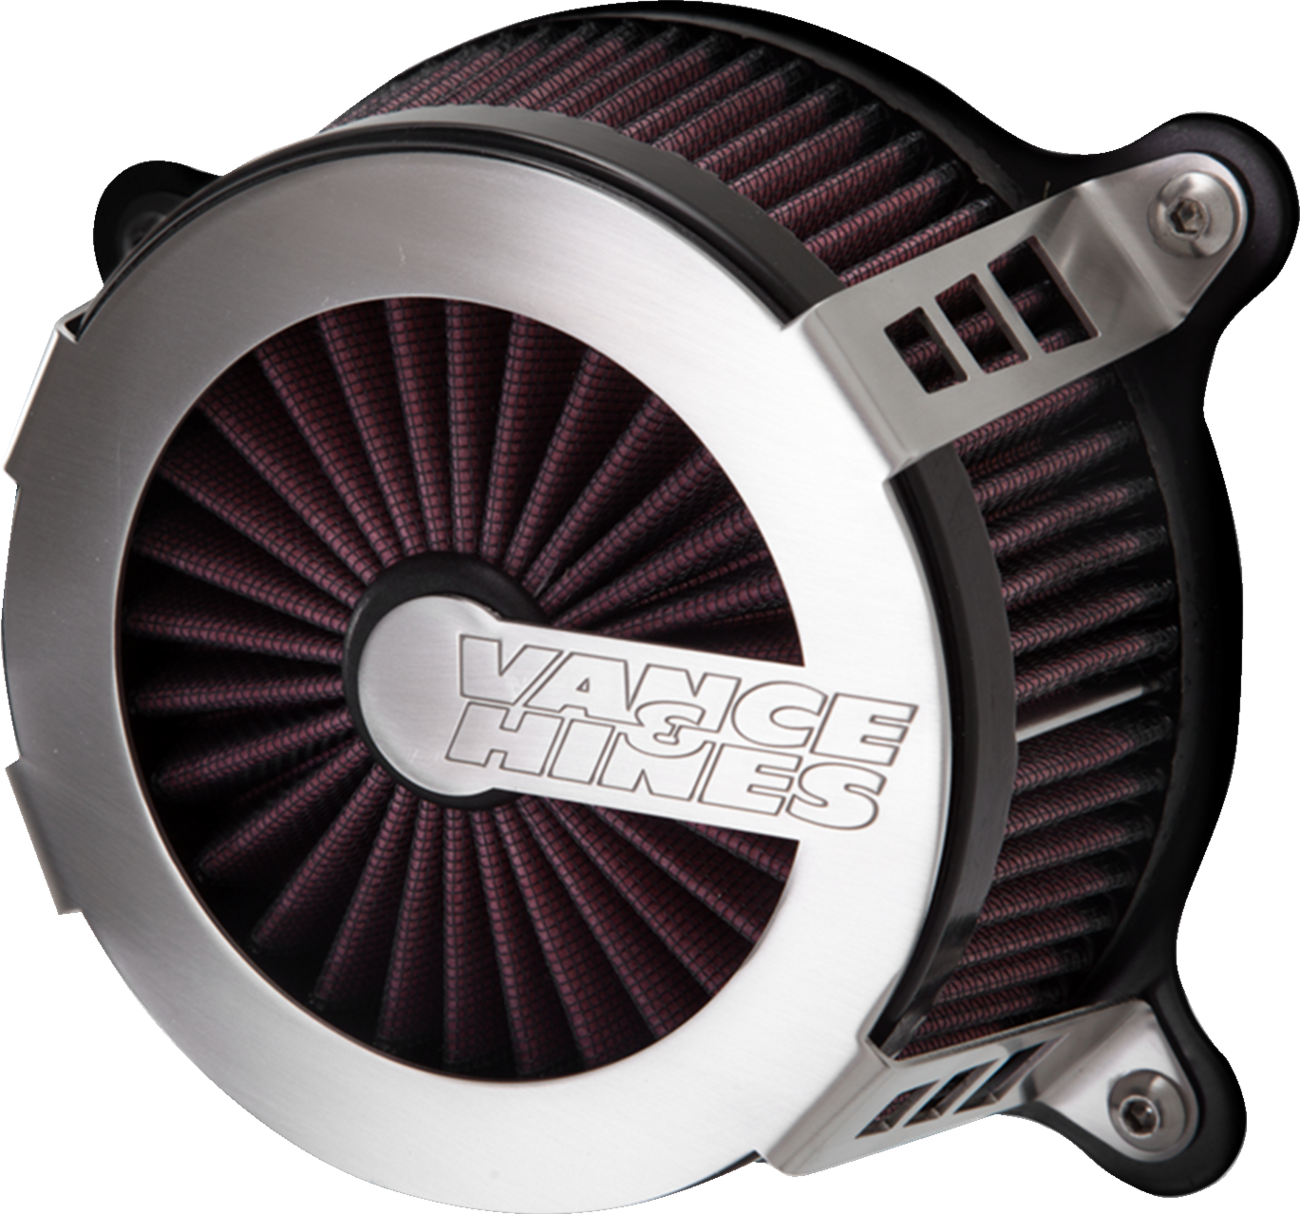 VANCE & HINES Cage Fighter Air Cleaner - ST/DY 70367